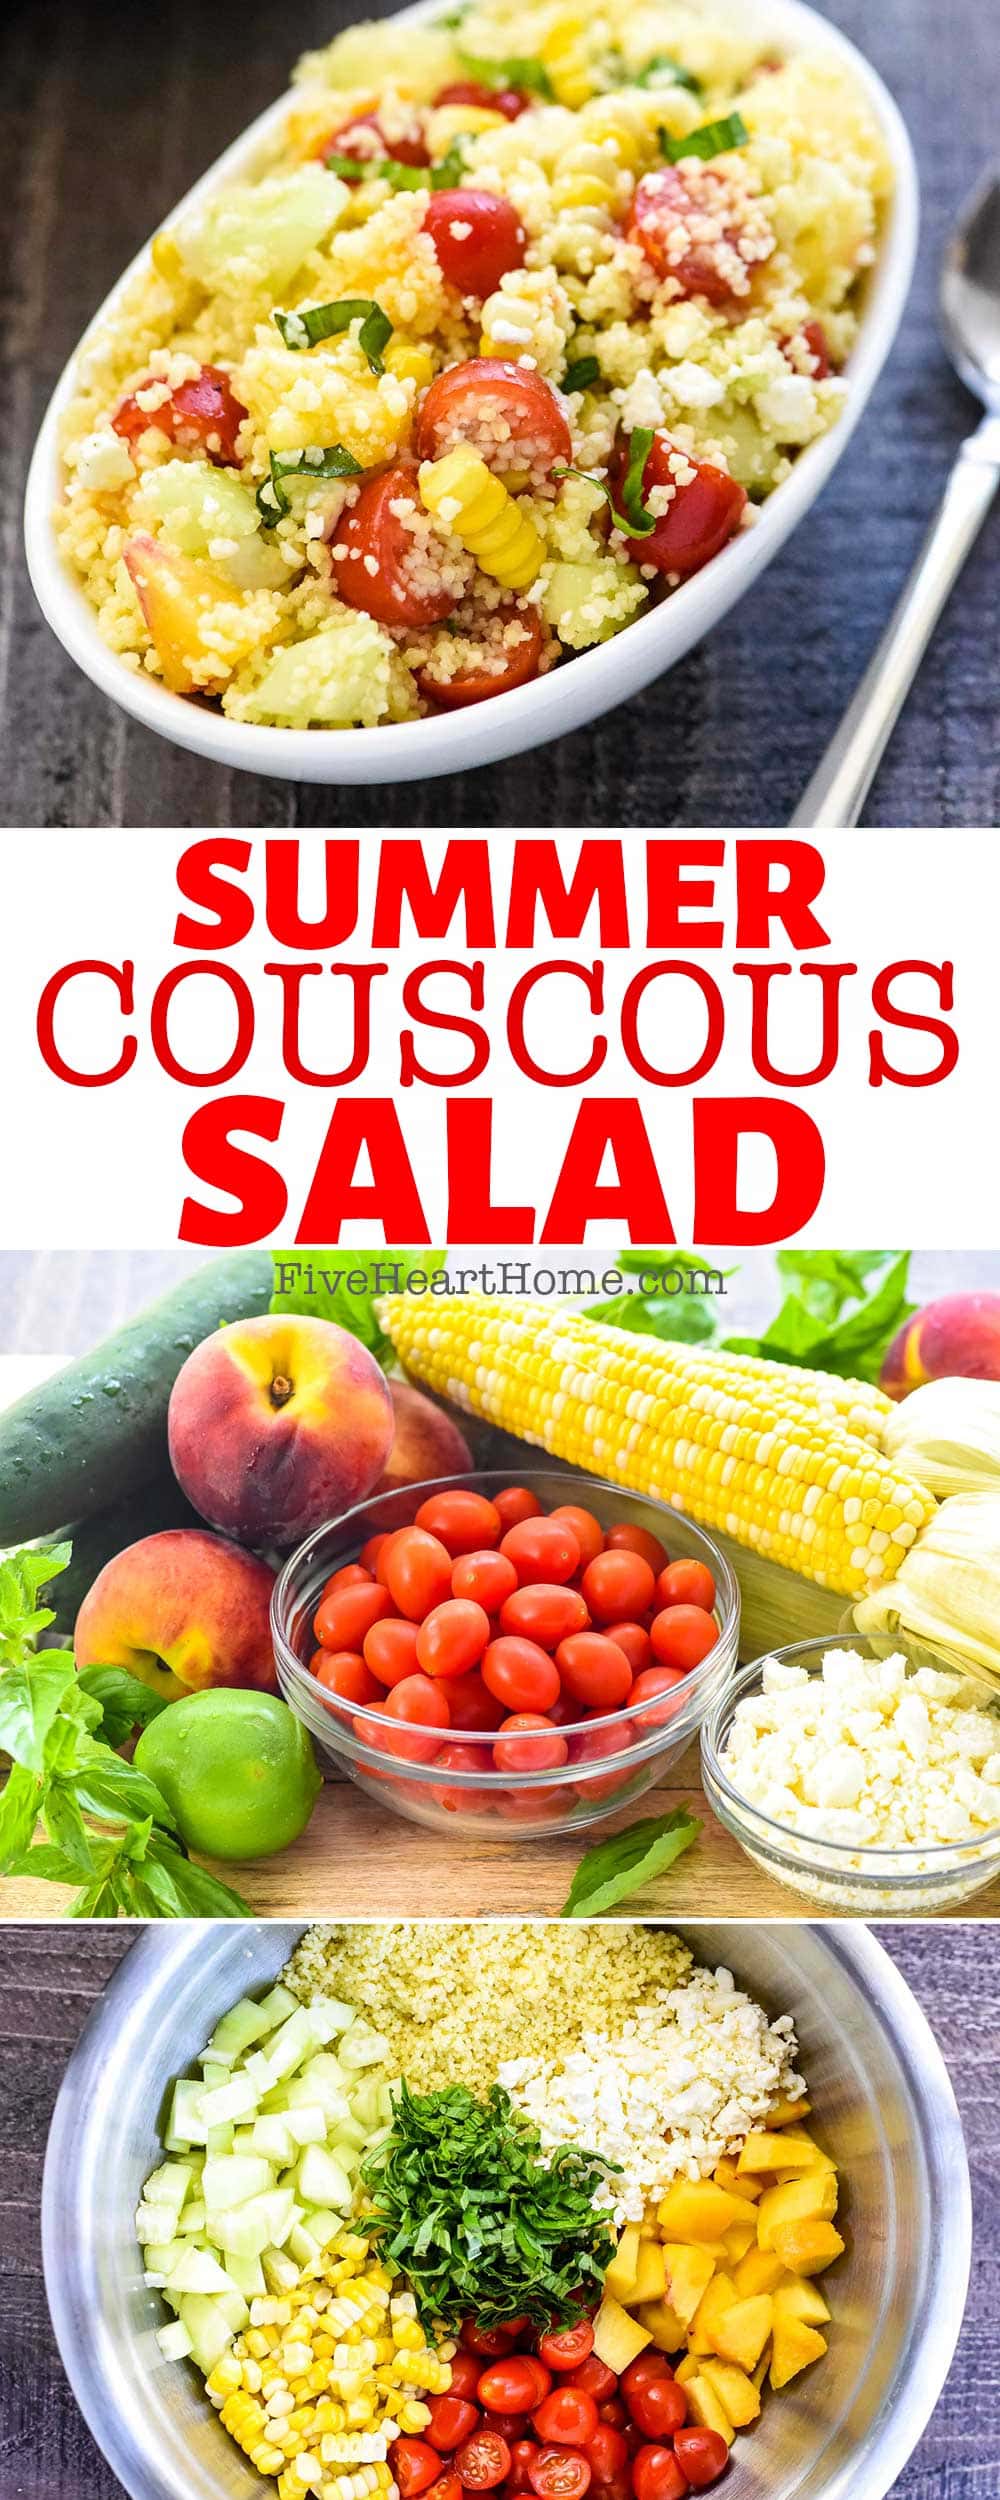 Couscous Salad ~ this flavorful summer side dish features fluffy couscous studded with fresh corn, juicy tomatoes, crisp cucumbers, sweet peaches, chopped basil, and creamy feta in an amazing honey lime dressing! | FiveHeartHome.com via @fivehearthome